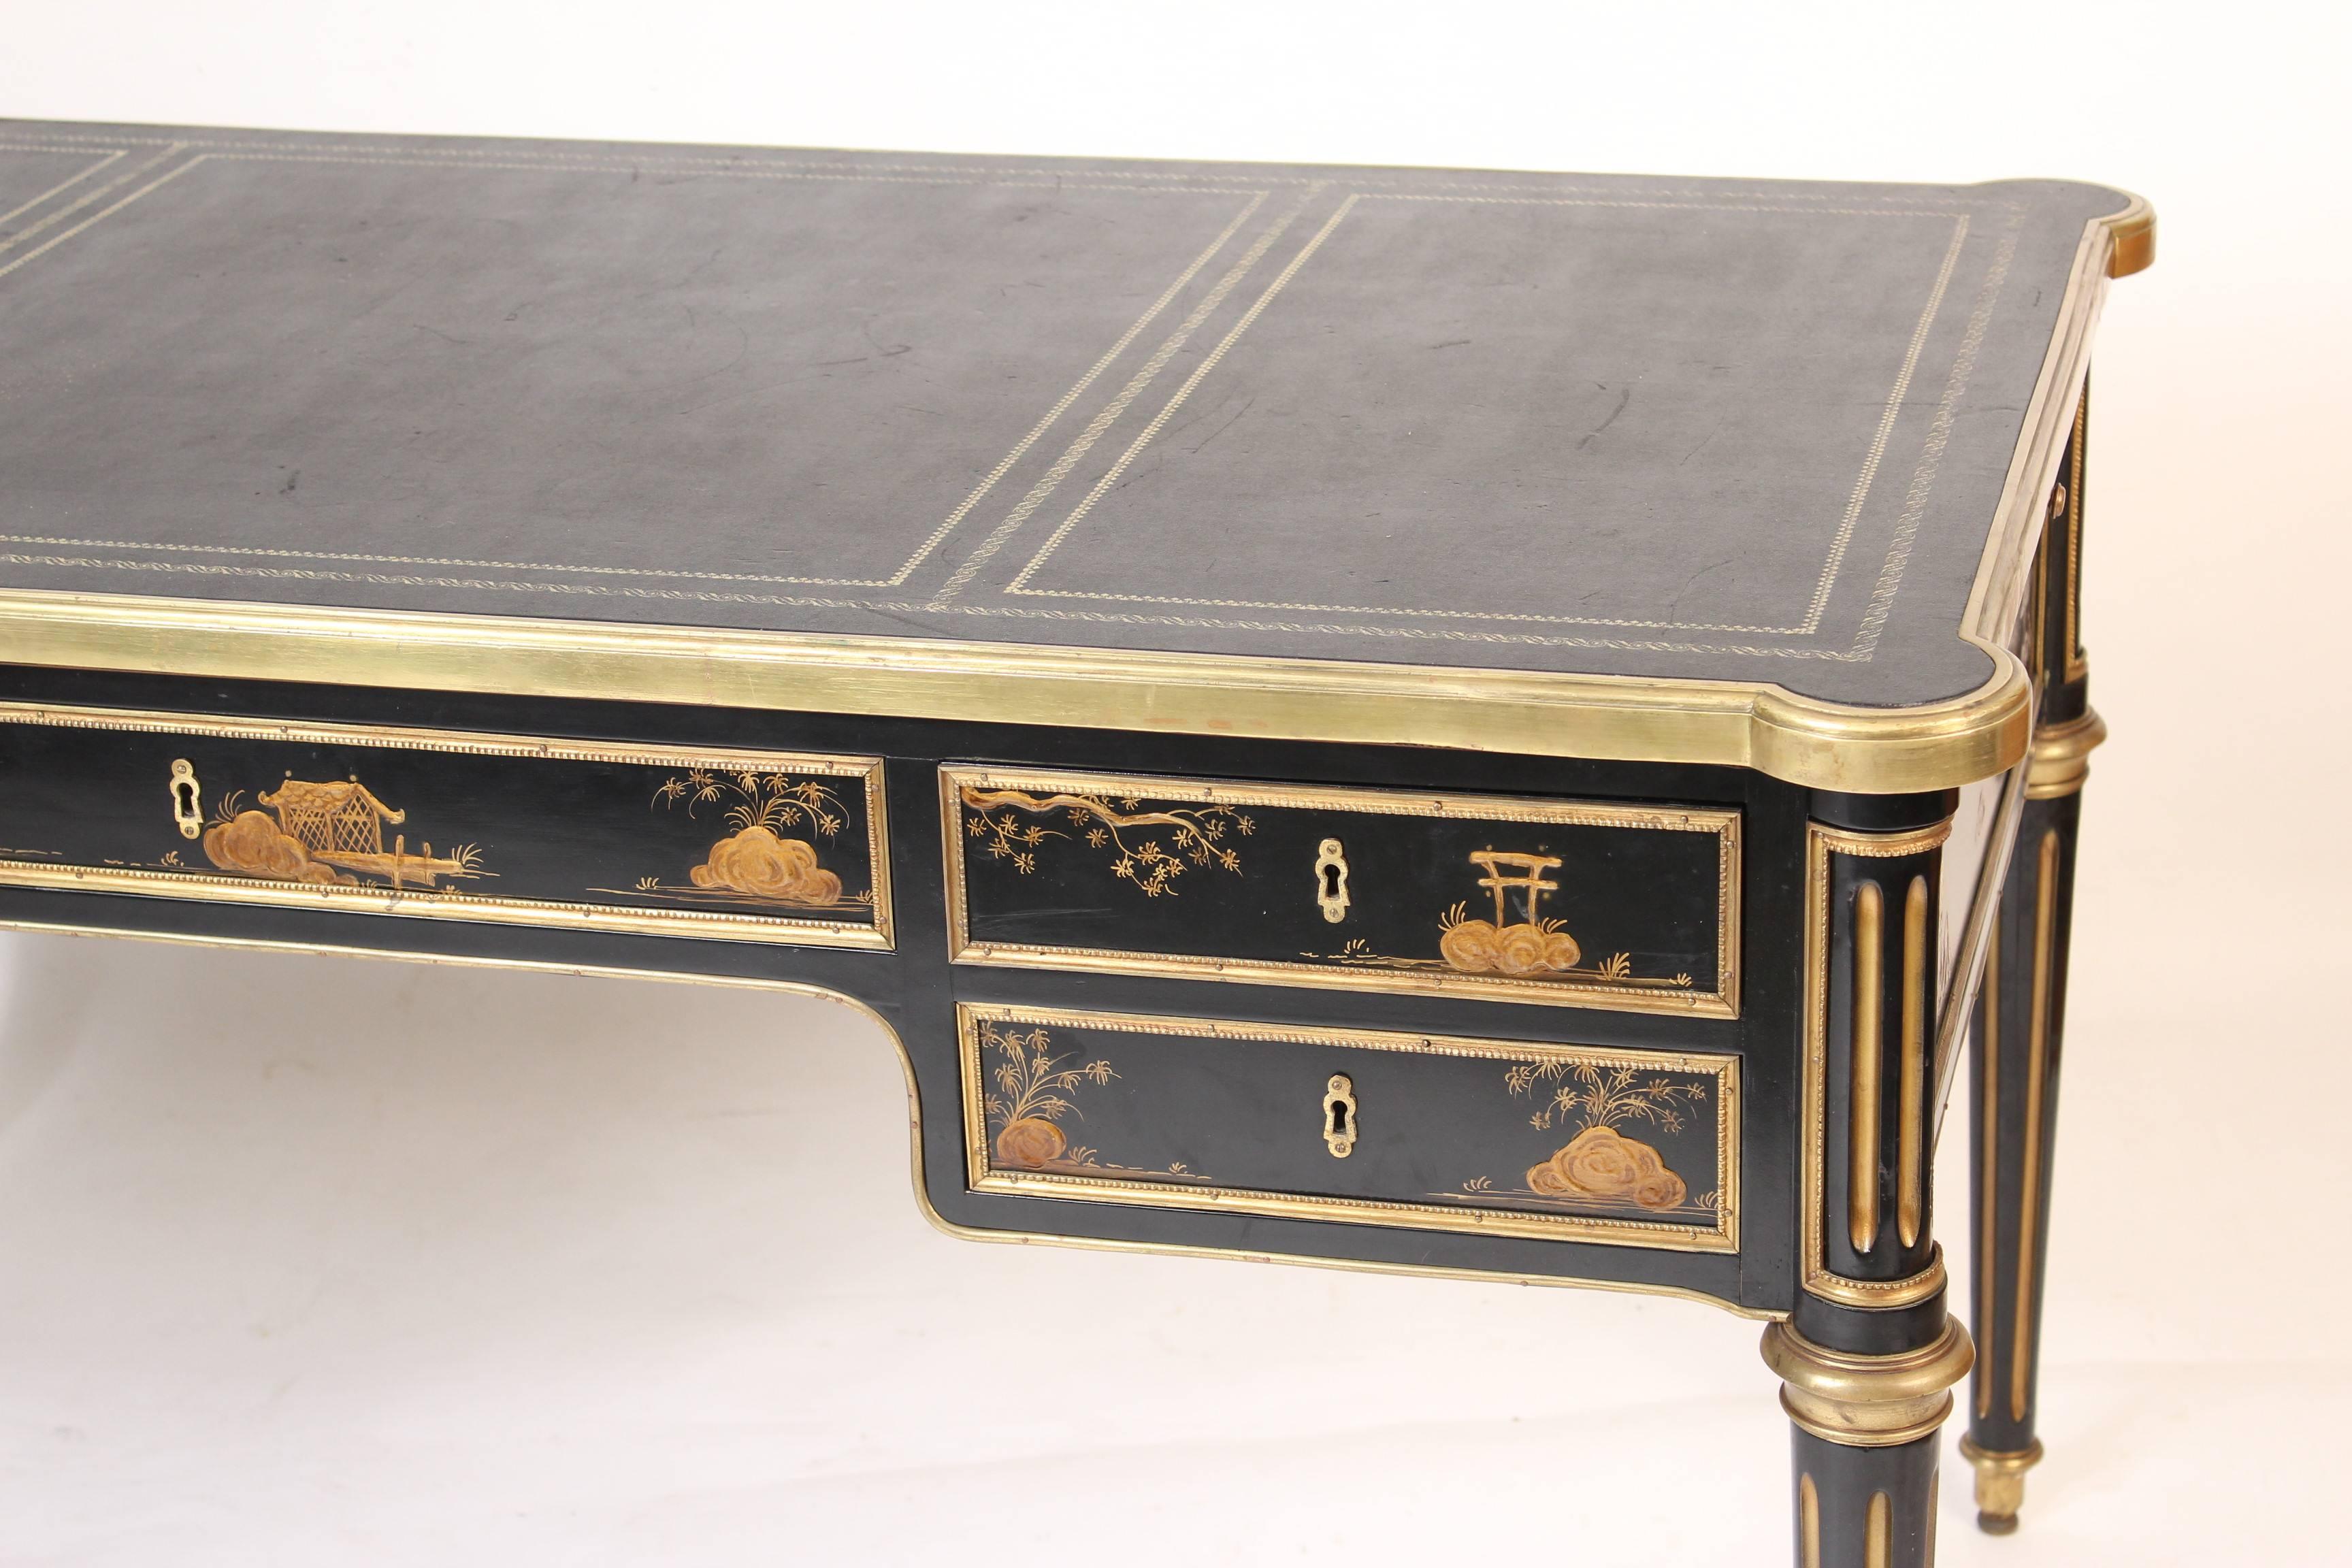 20th Century Louis XVI Style Chinoiserie Decorated Desk